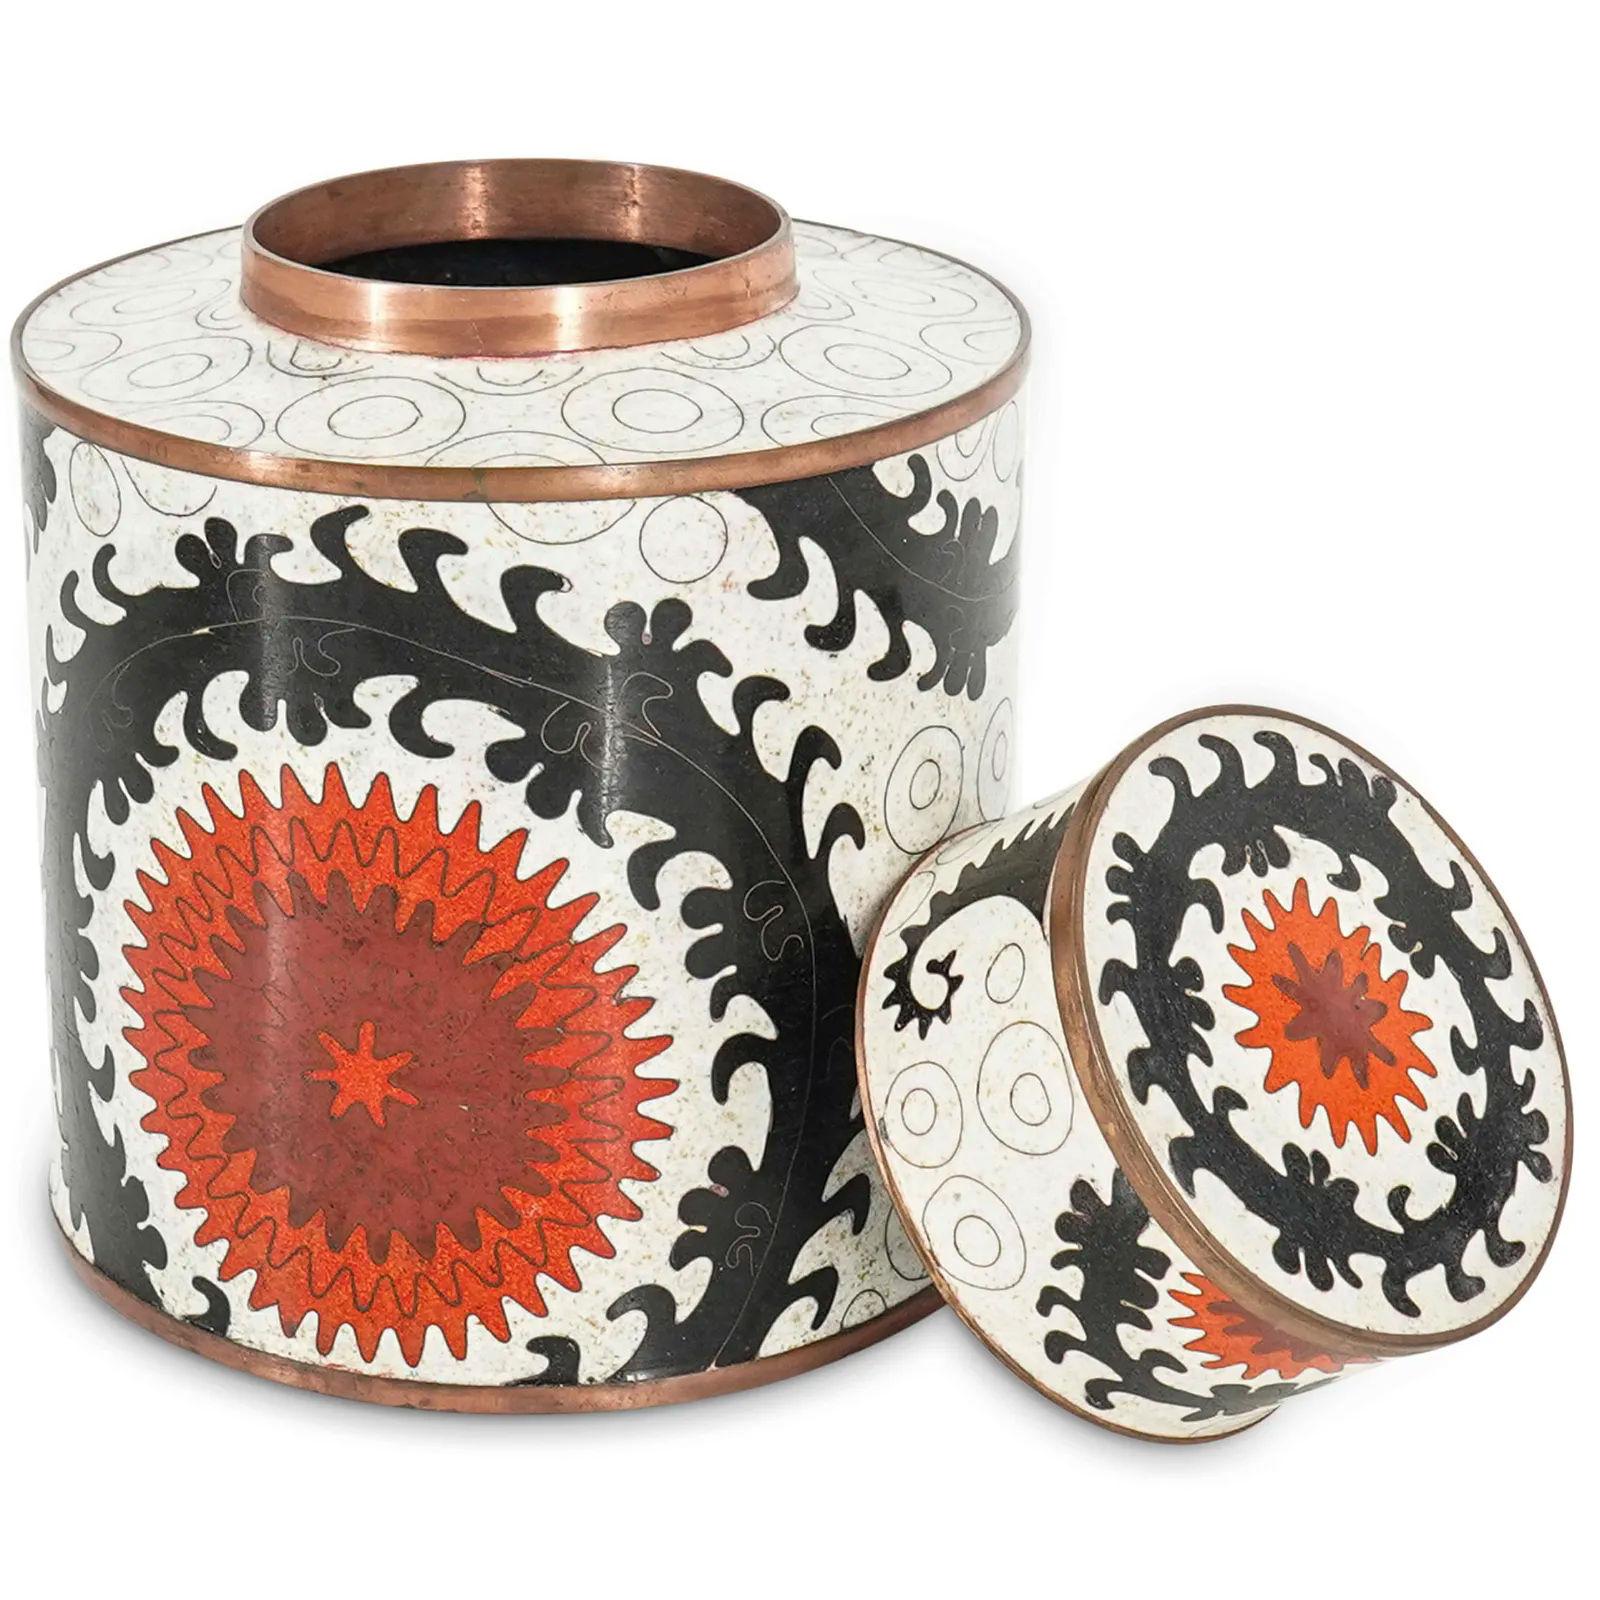 Fabienne Jouvin Cloisonne Enamel Bowl and Jar Set In Good Condition For Sale In New York, NY